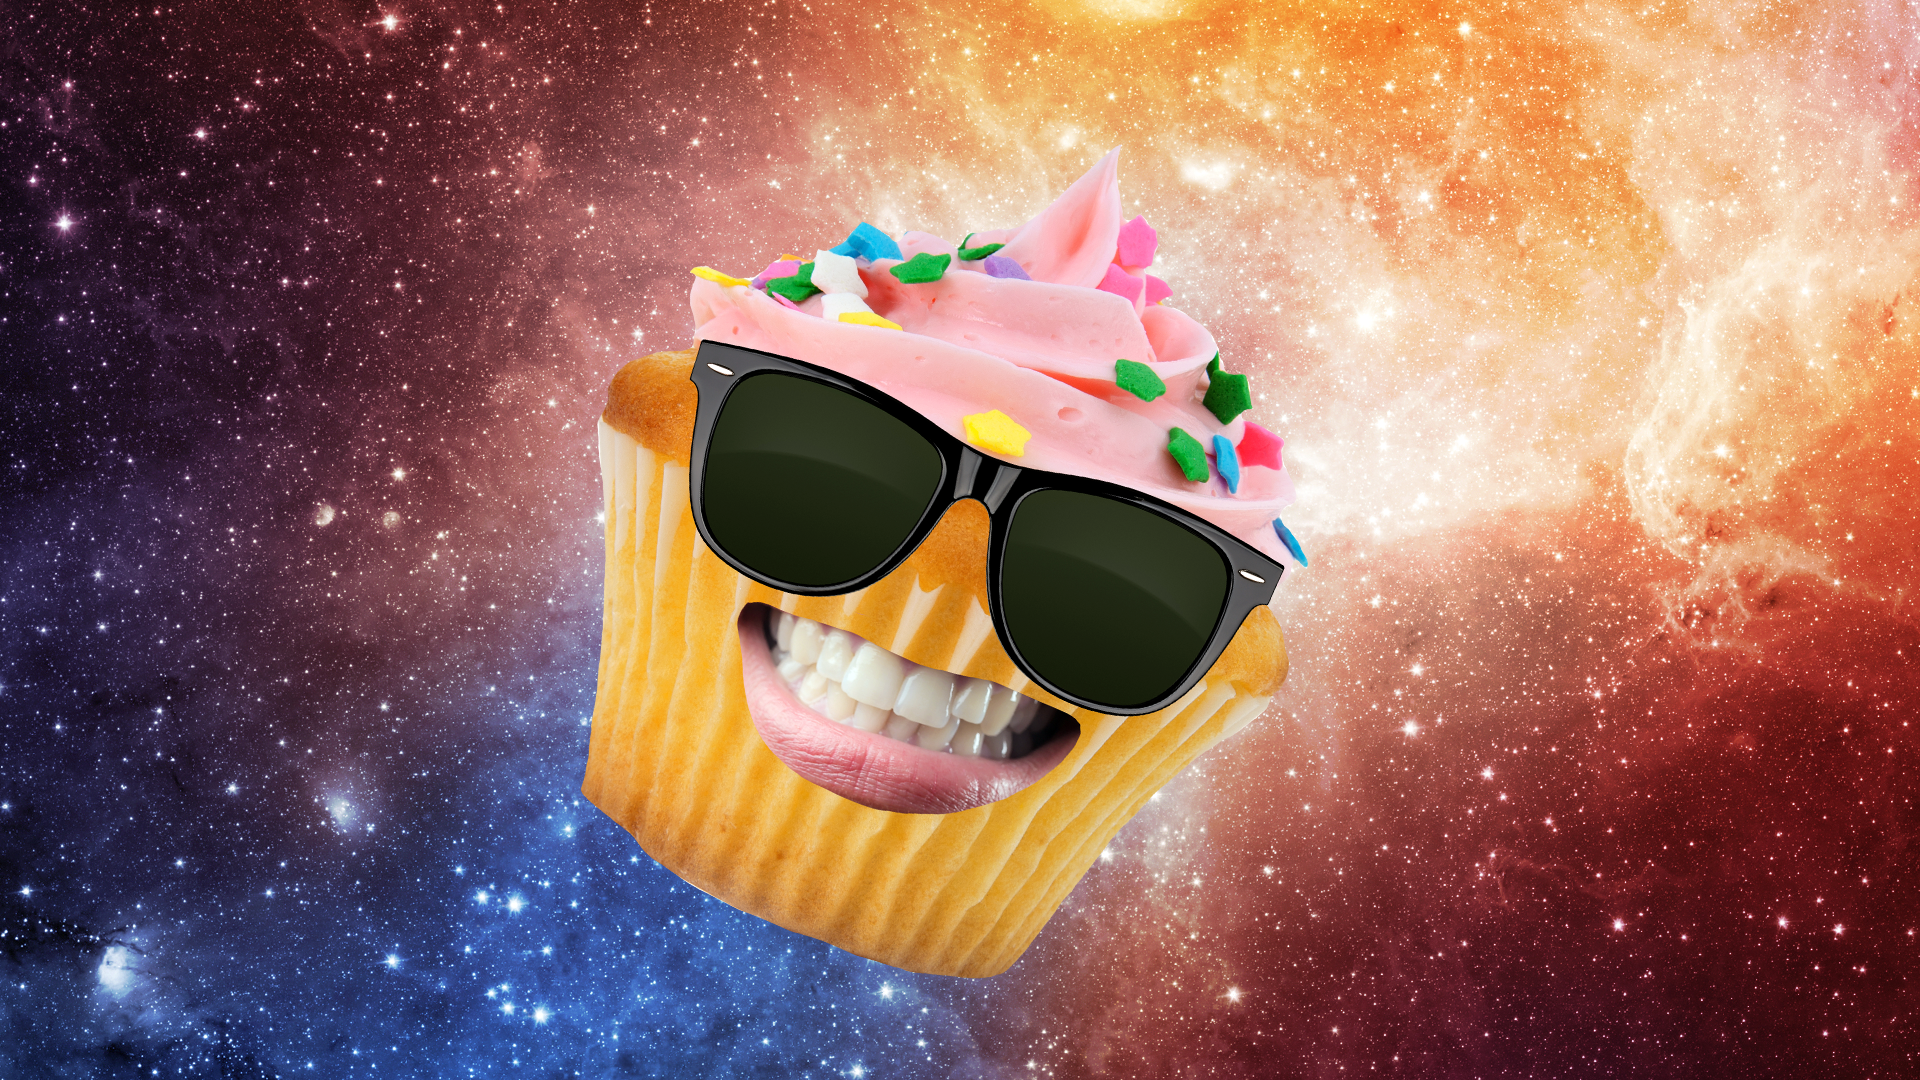 Cupcake in space 